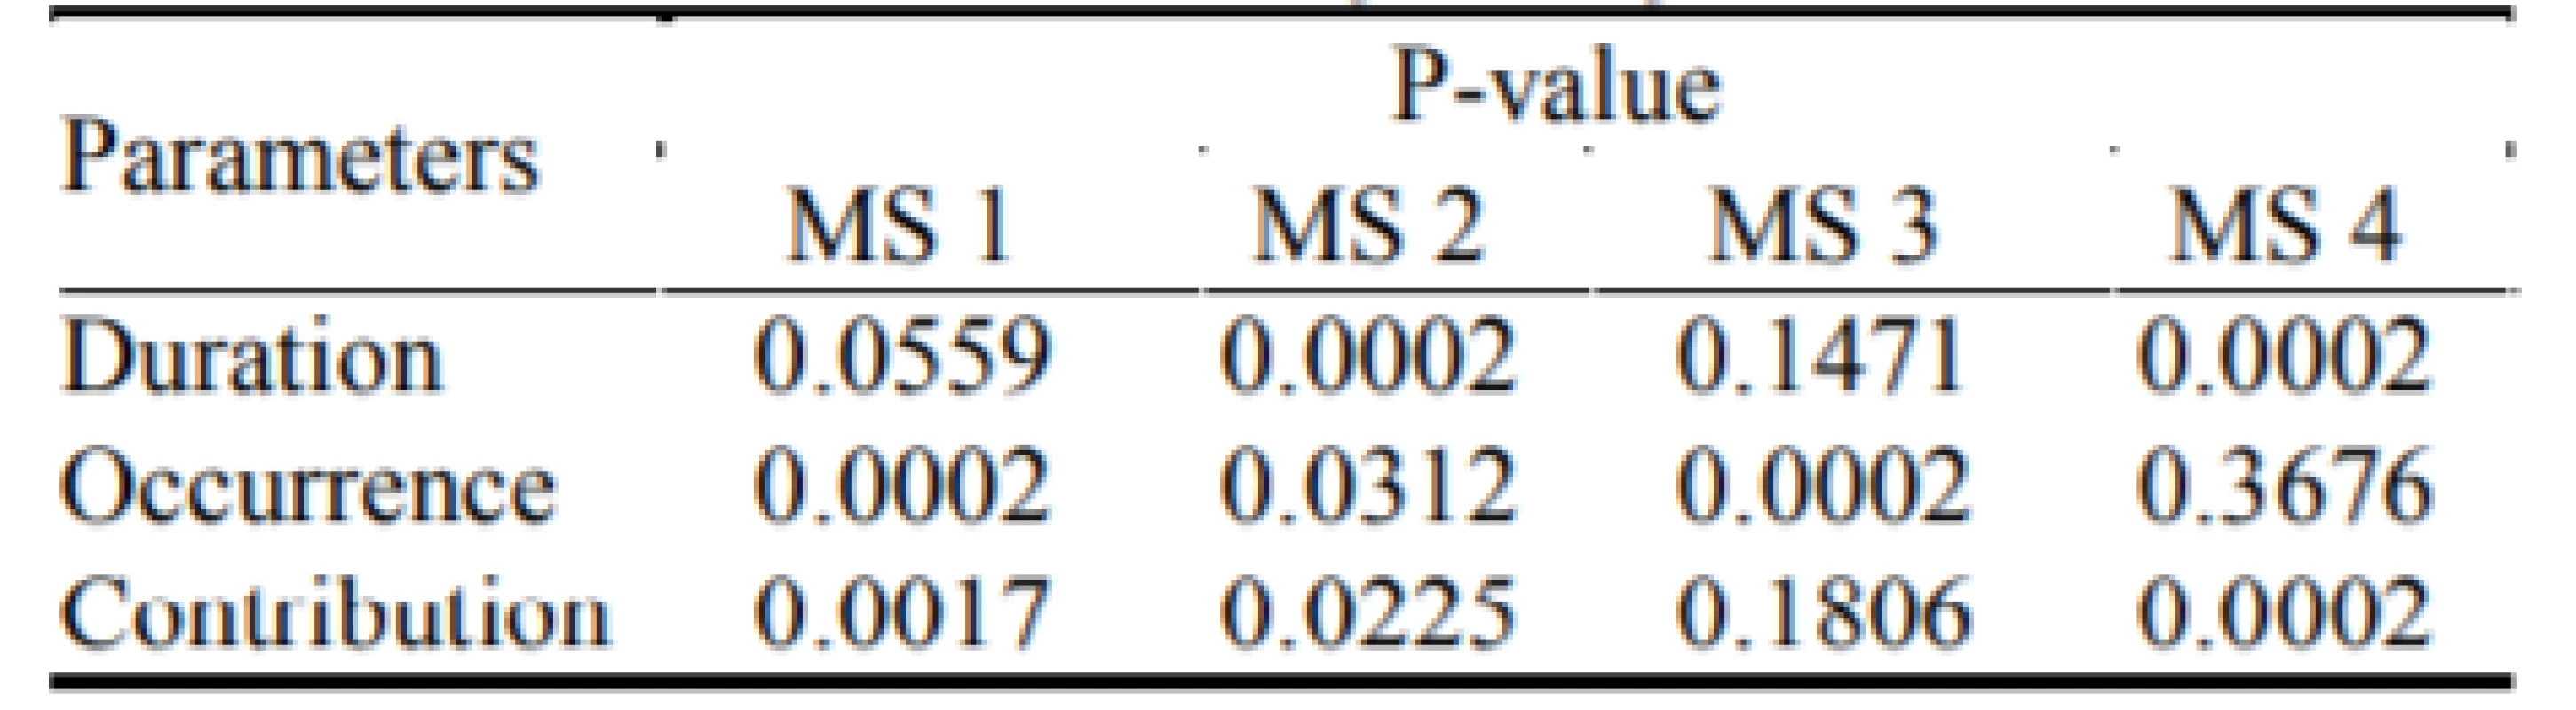 The p-values from the Mann-Whitney tests of
hypothesis between patients with epilepsy and nonepileptic control datasets of parameters Duration,
Occurrence and Contribution for all four microstates.